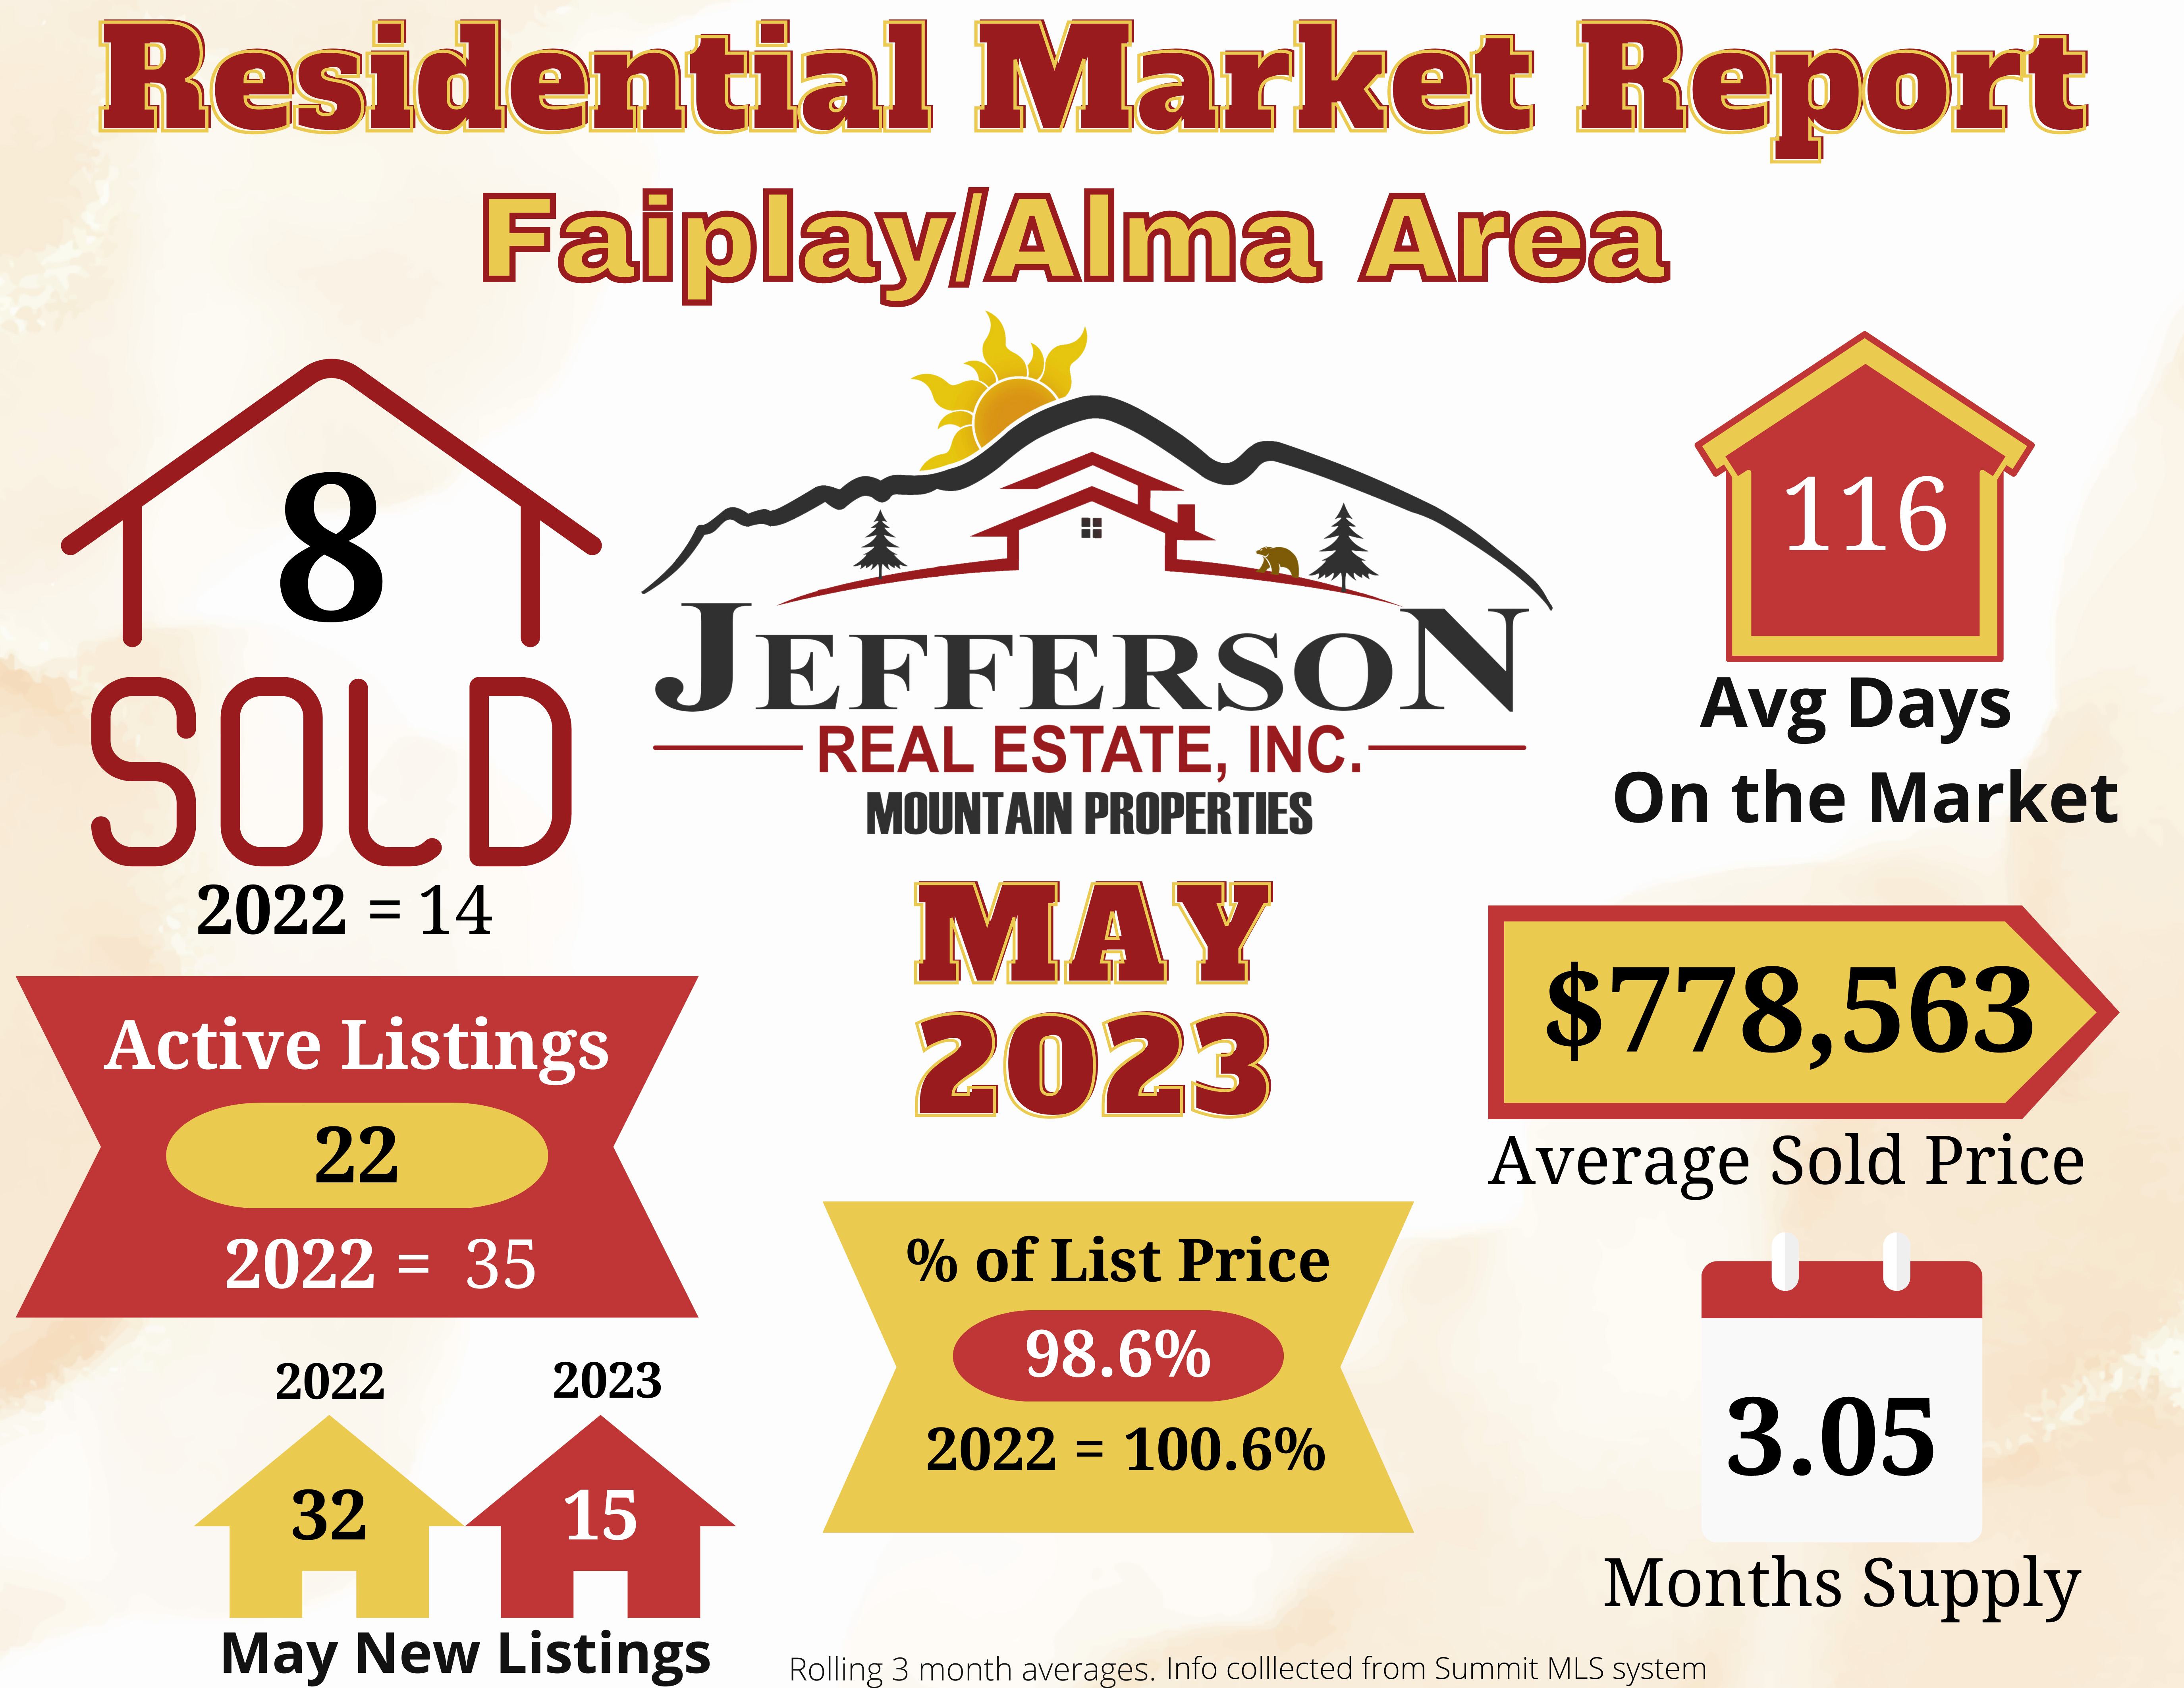 Fairplay/Alma area Residential Market report May 2023